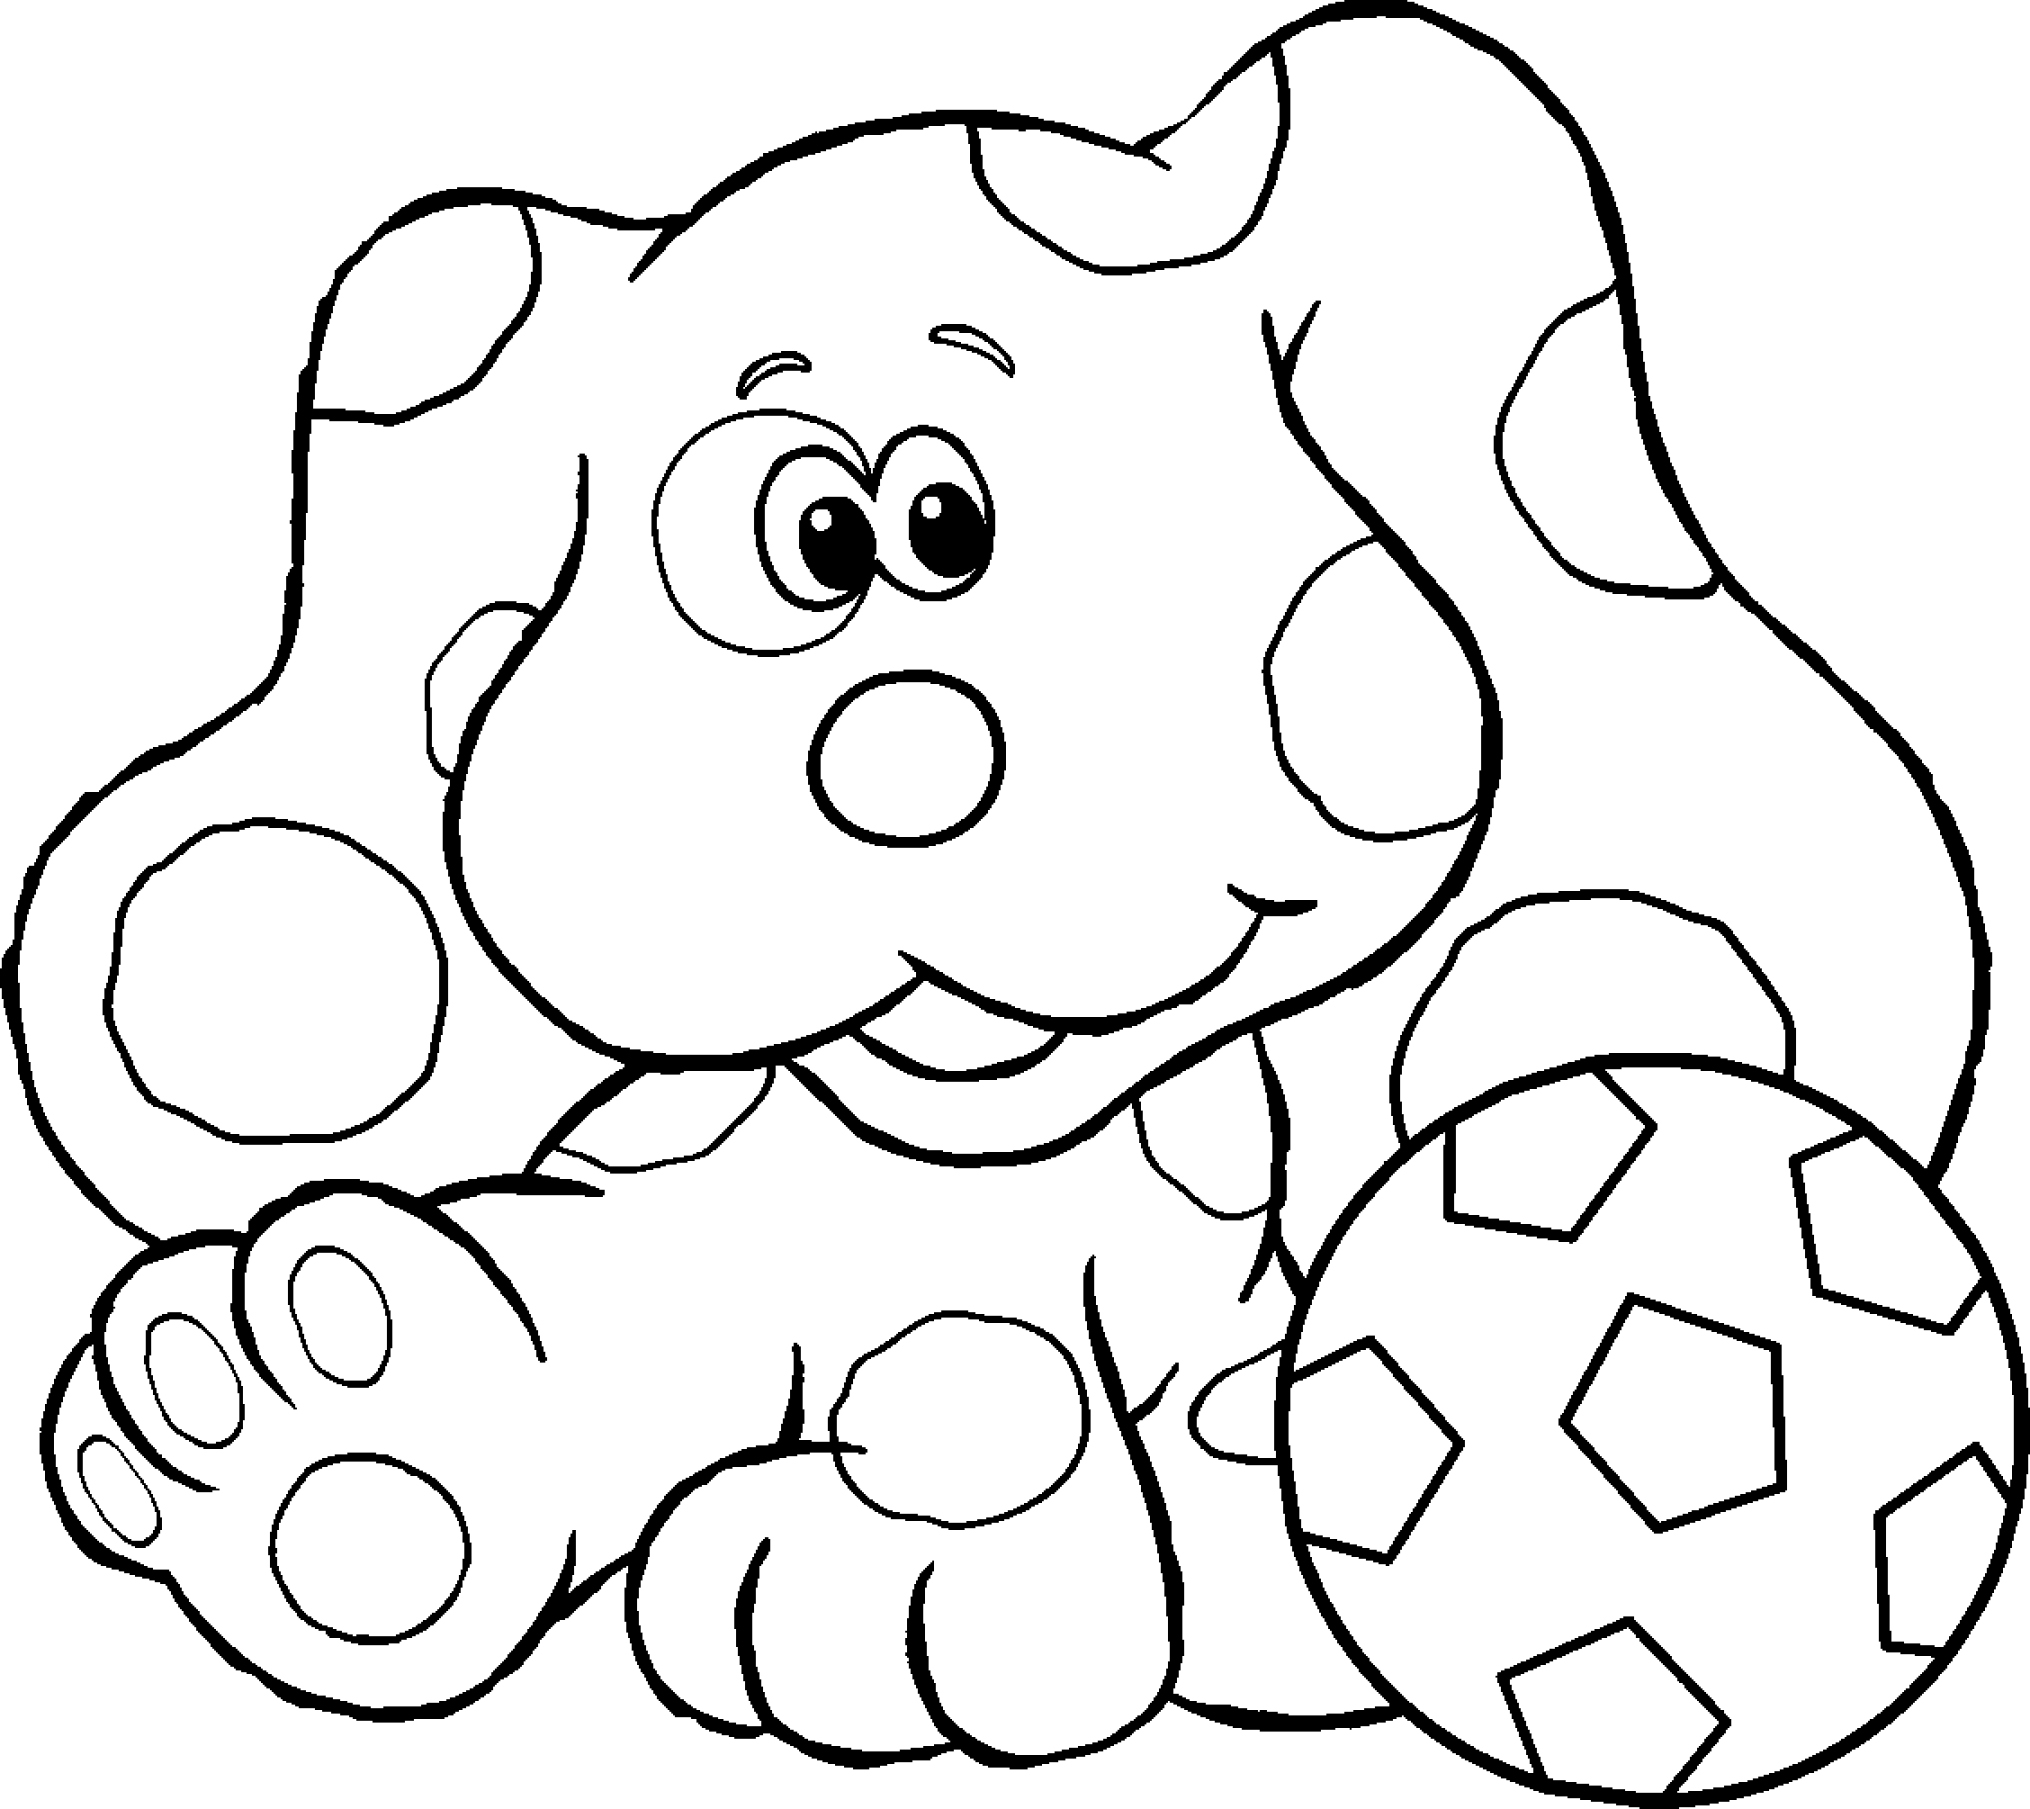 blues clues printables | Coloring Picture HD For Kids | Fransus ...